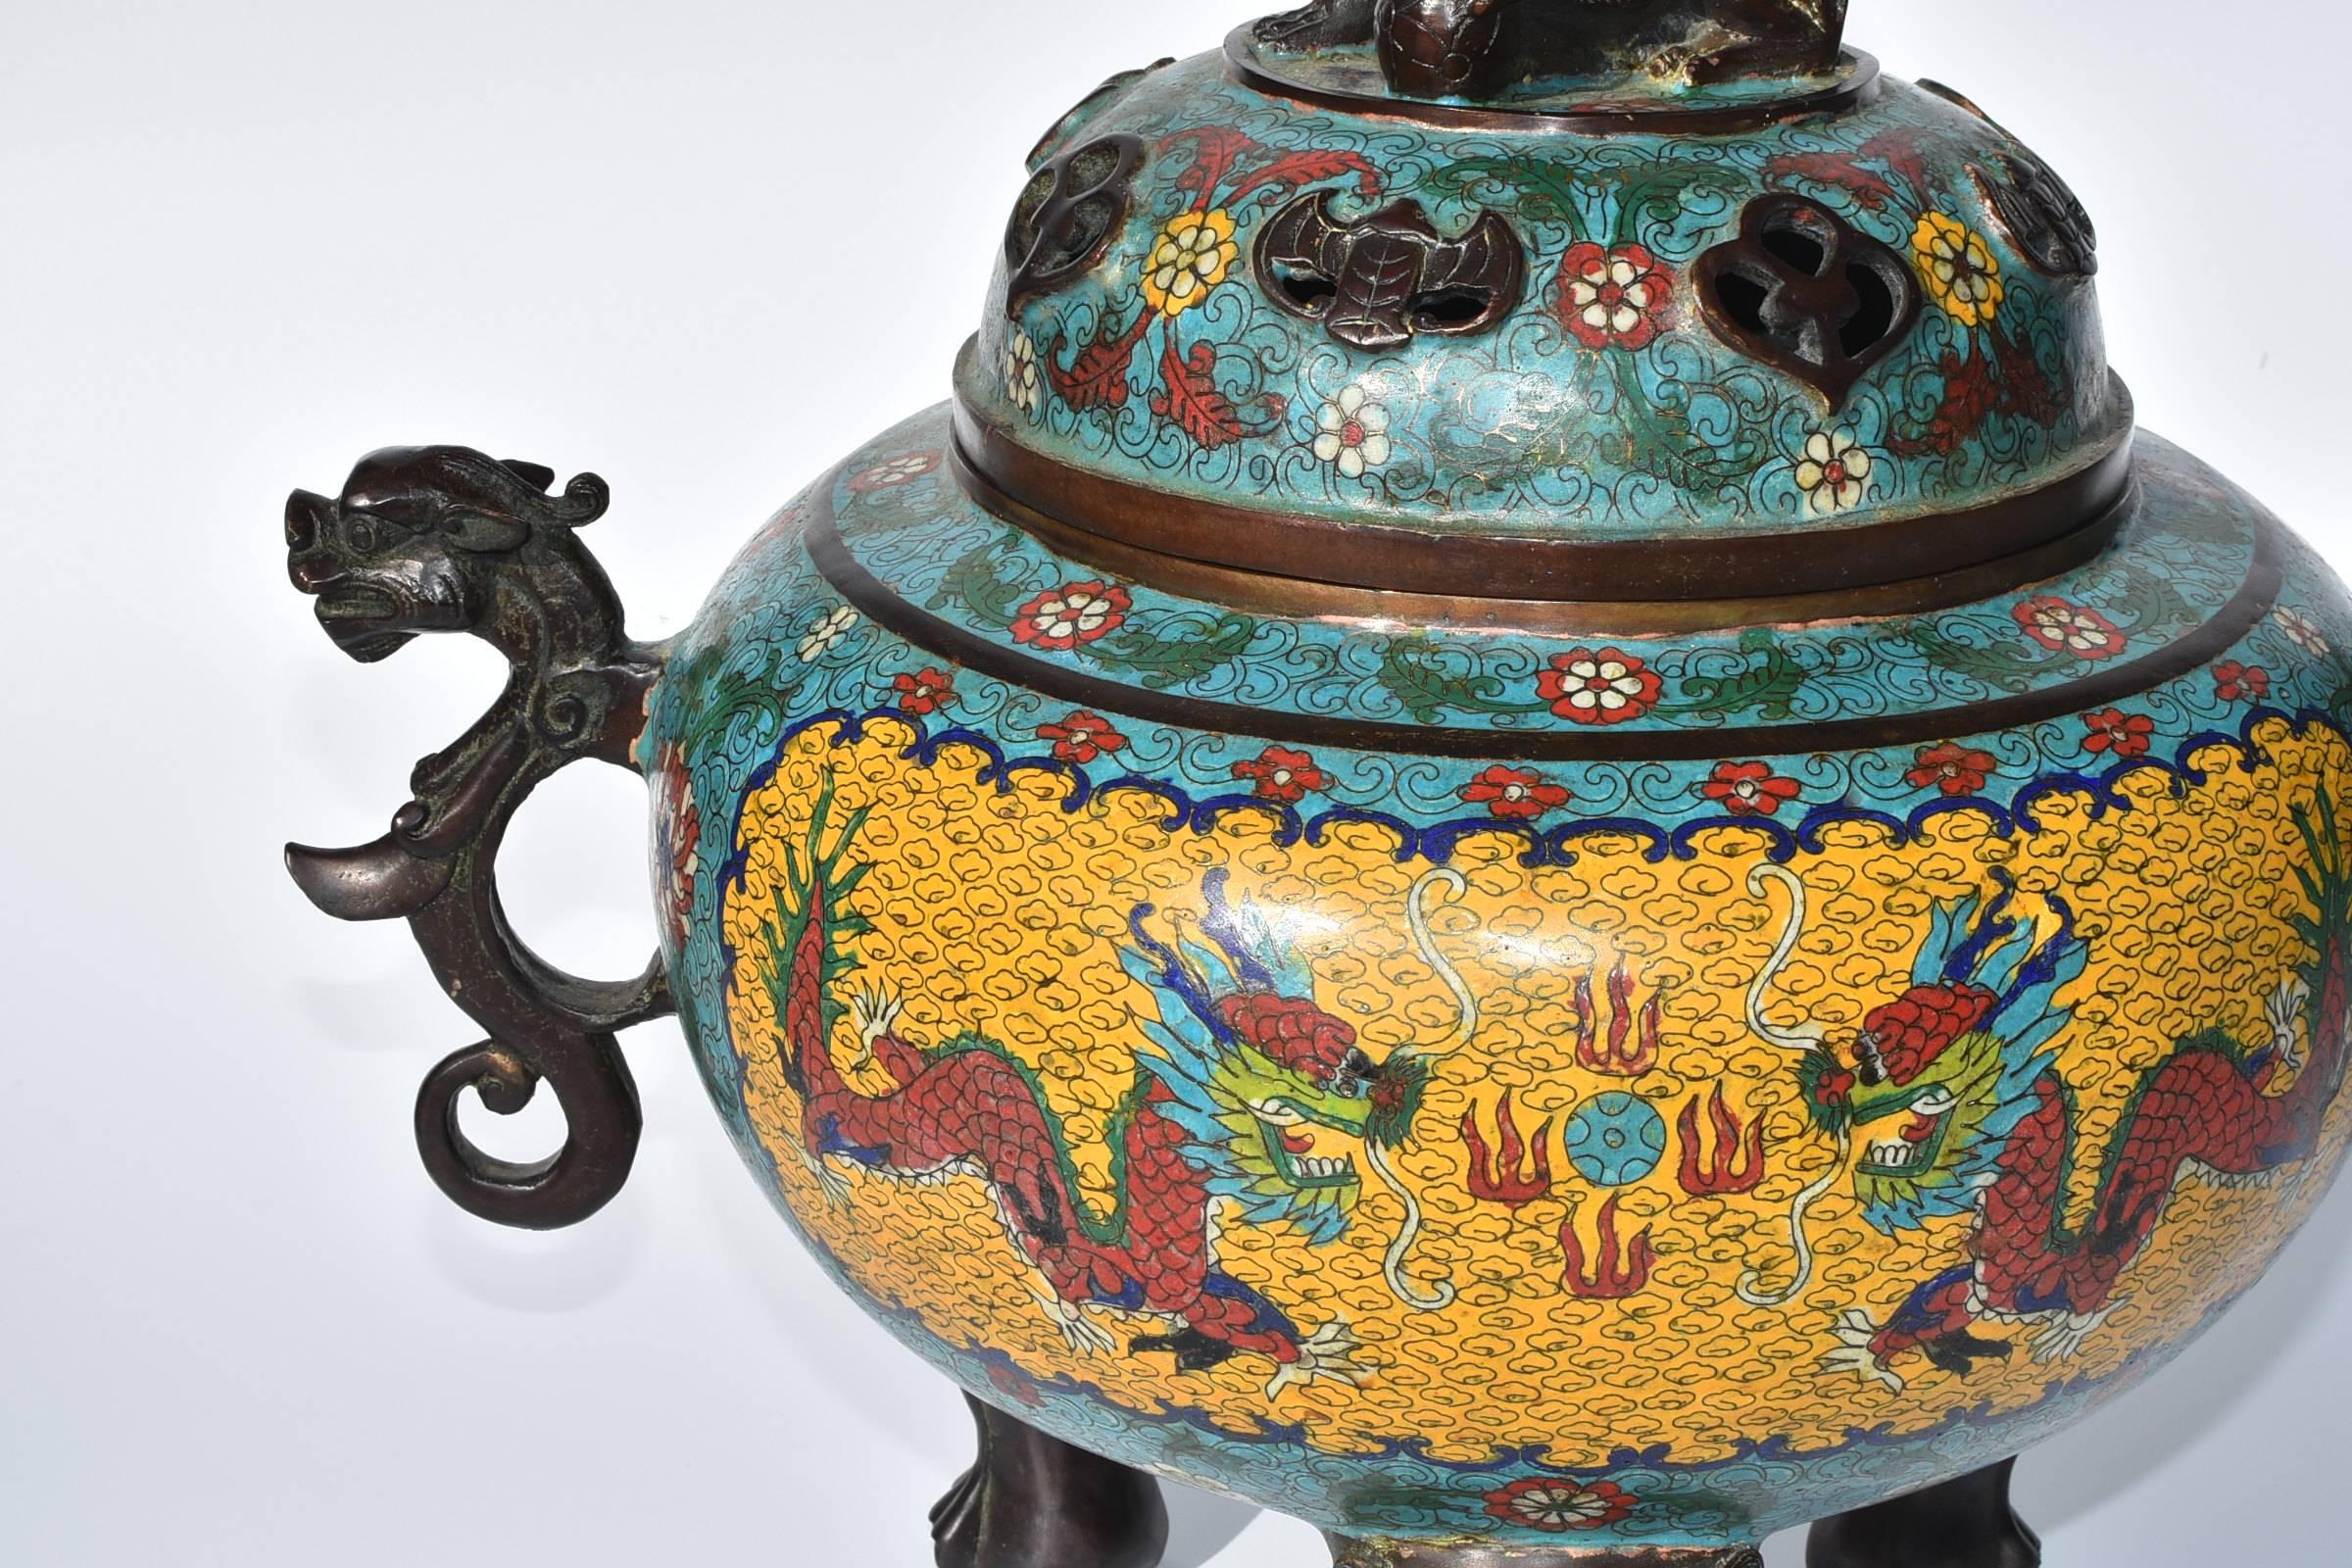 A giant cloisonné incense burner. 

This is a very substantial bronze cloisonné piece. It features a foo dog as a finial and three beast motif bronze legs. A pair of bronze dragons adorn the sides, adding elegance to the large censer. The use of